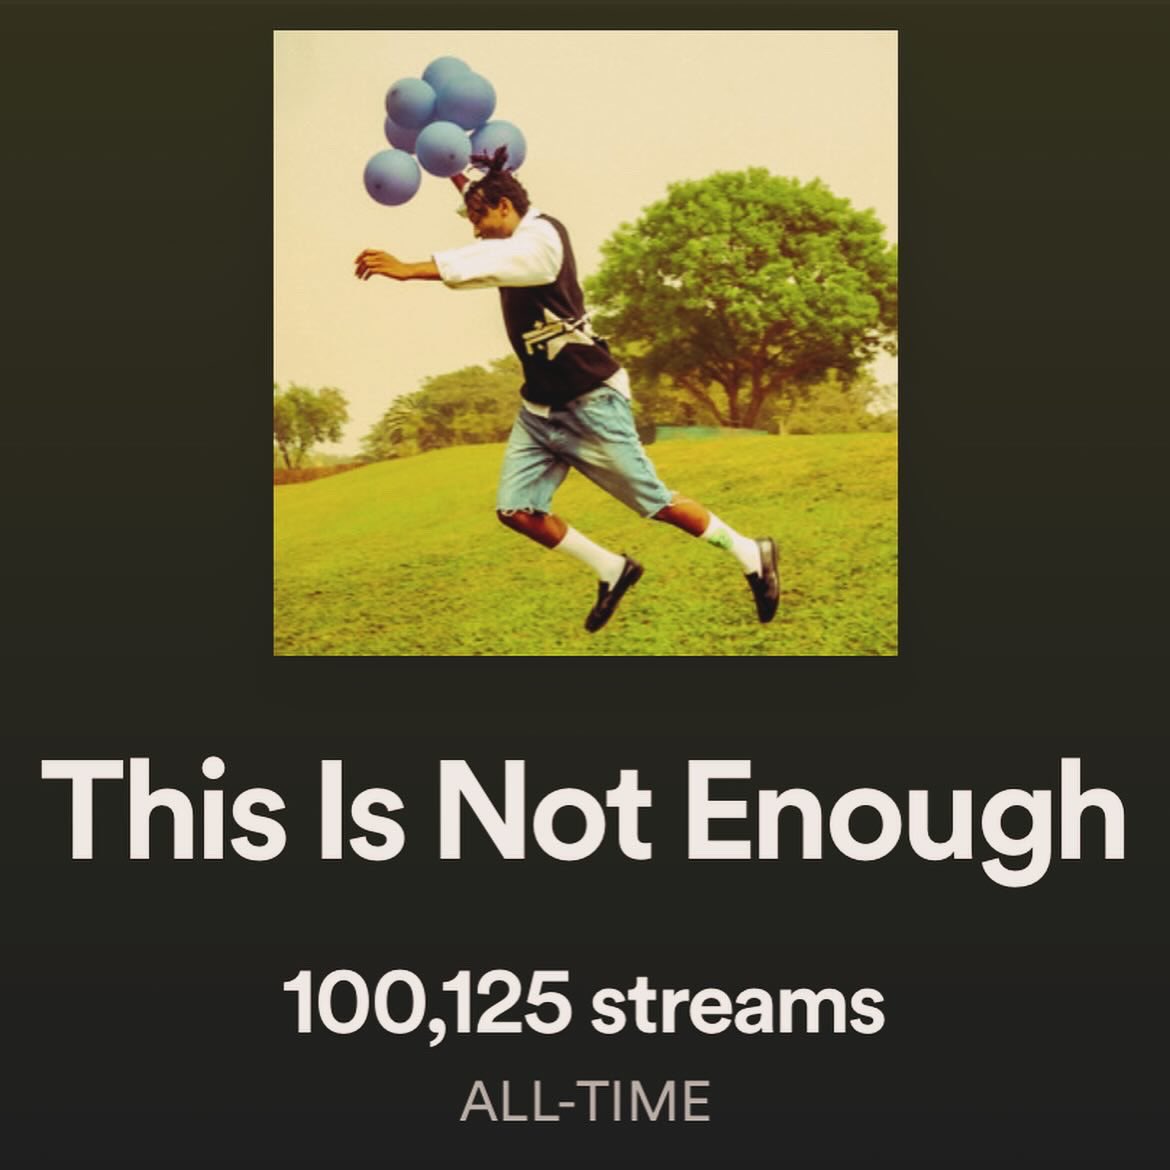 guysss i got my first 100k for a single song on @Spotify, this is so crazy to me! 💜 thank you for believing in me, thank you for listening 💜